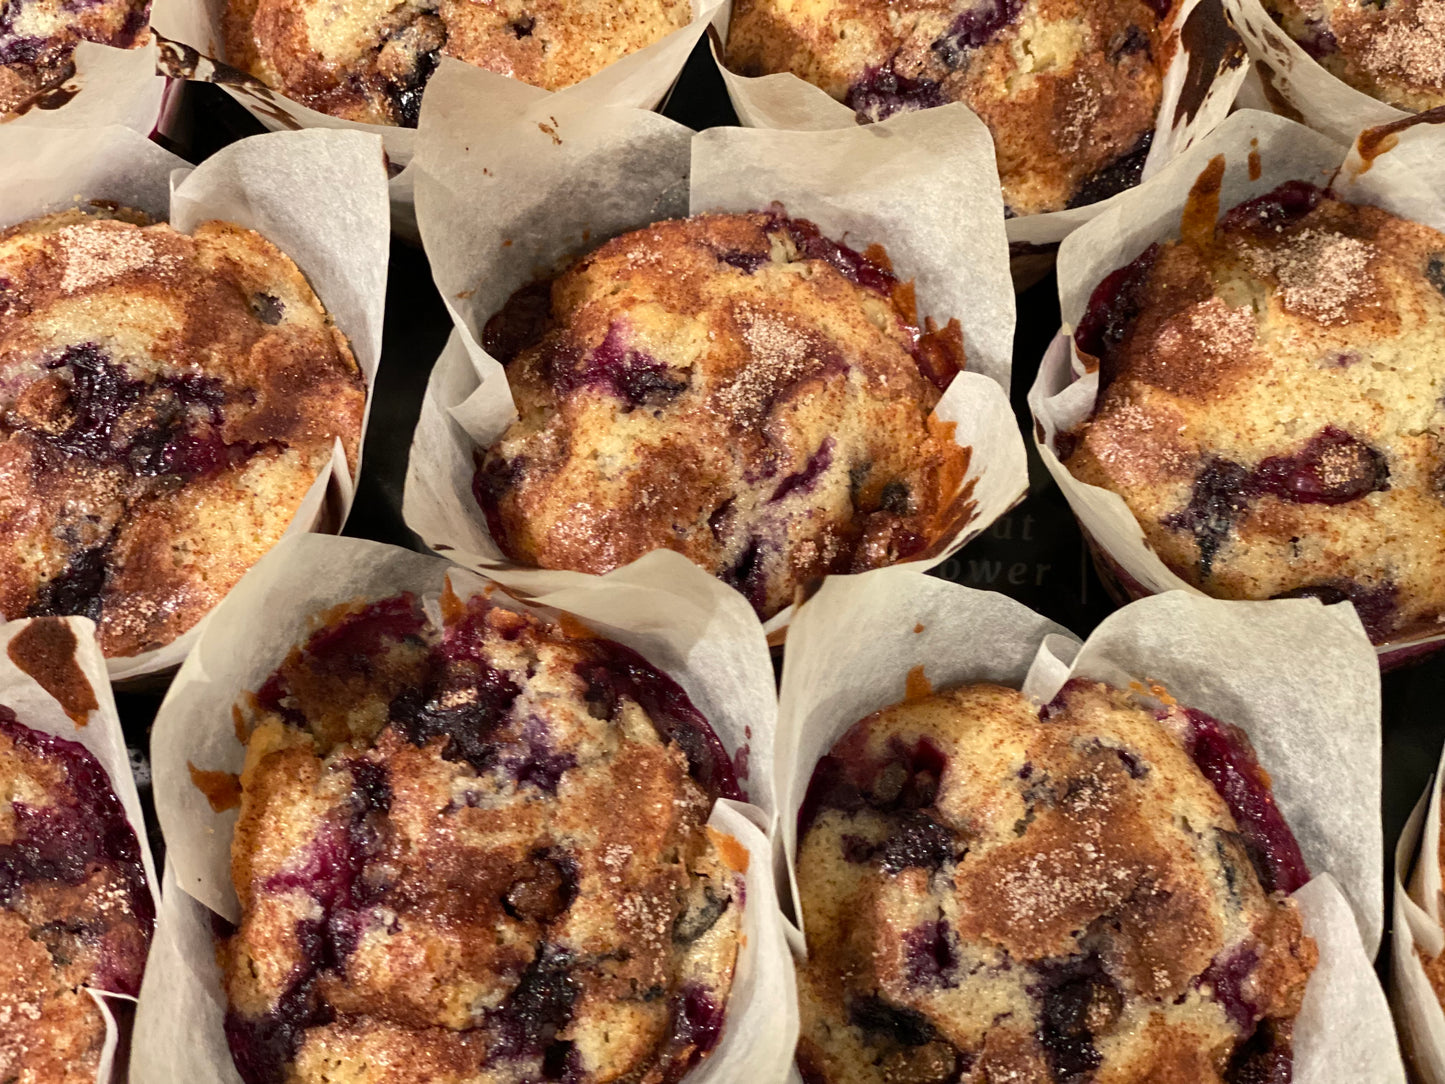 Famous Department Store Blueberry + Cinnamon Muffins